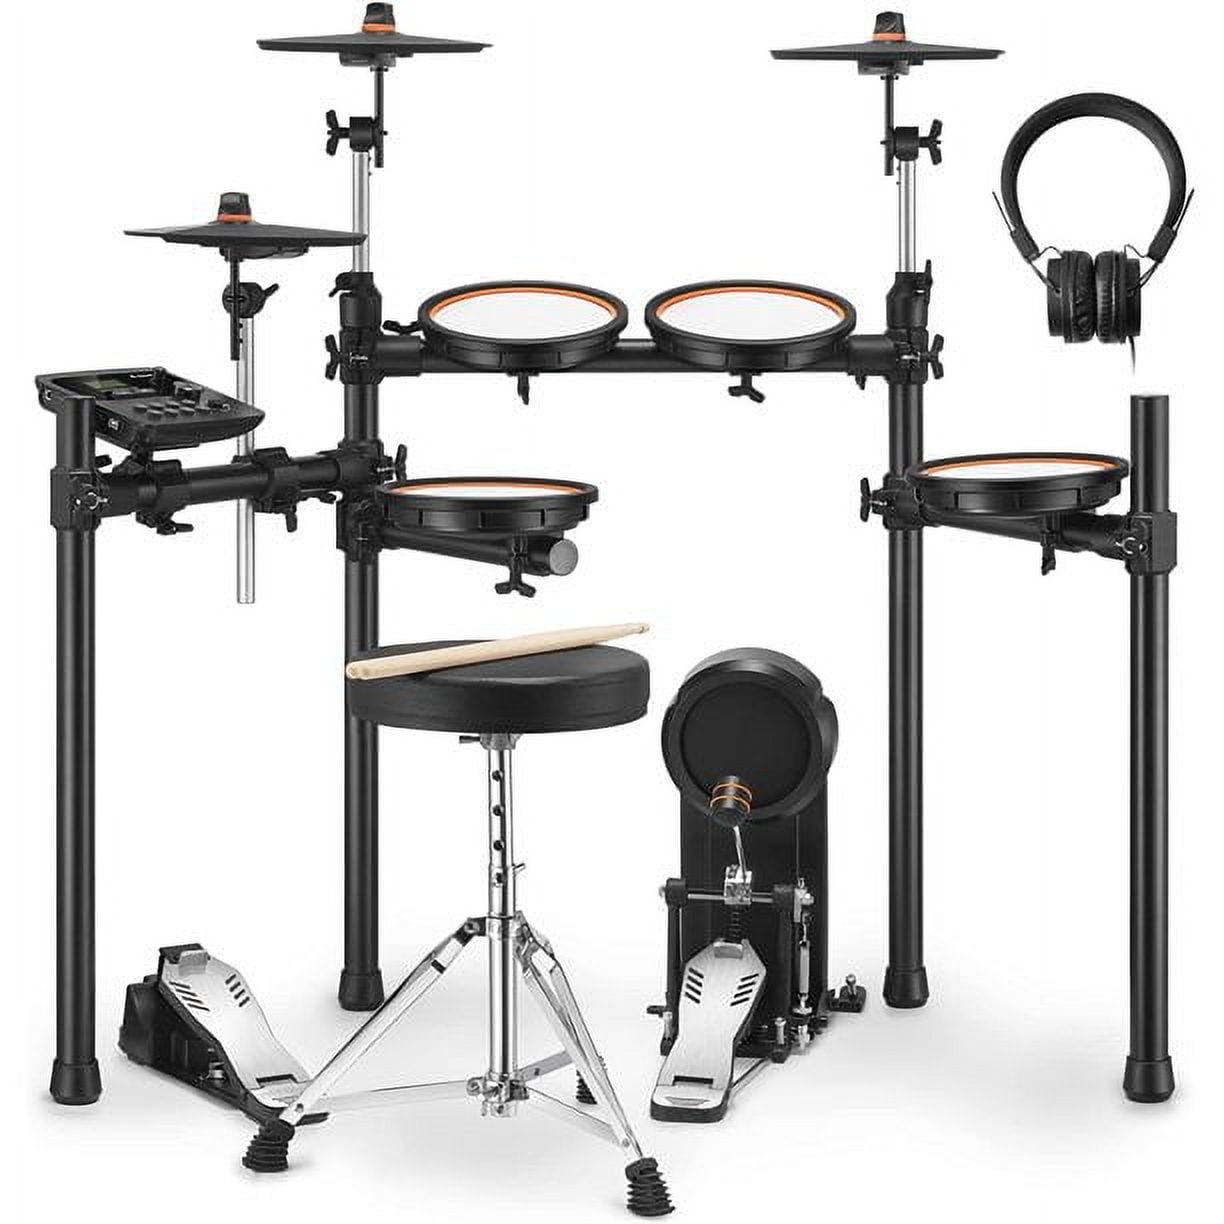 The 7 Best Electronic Drum Pads for Your Studio